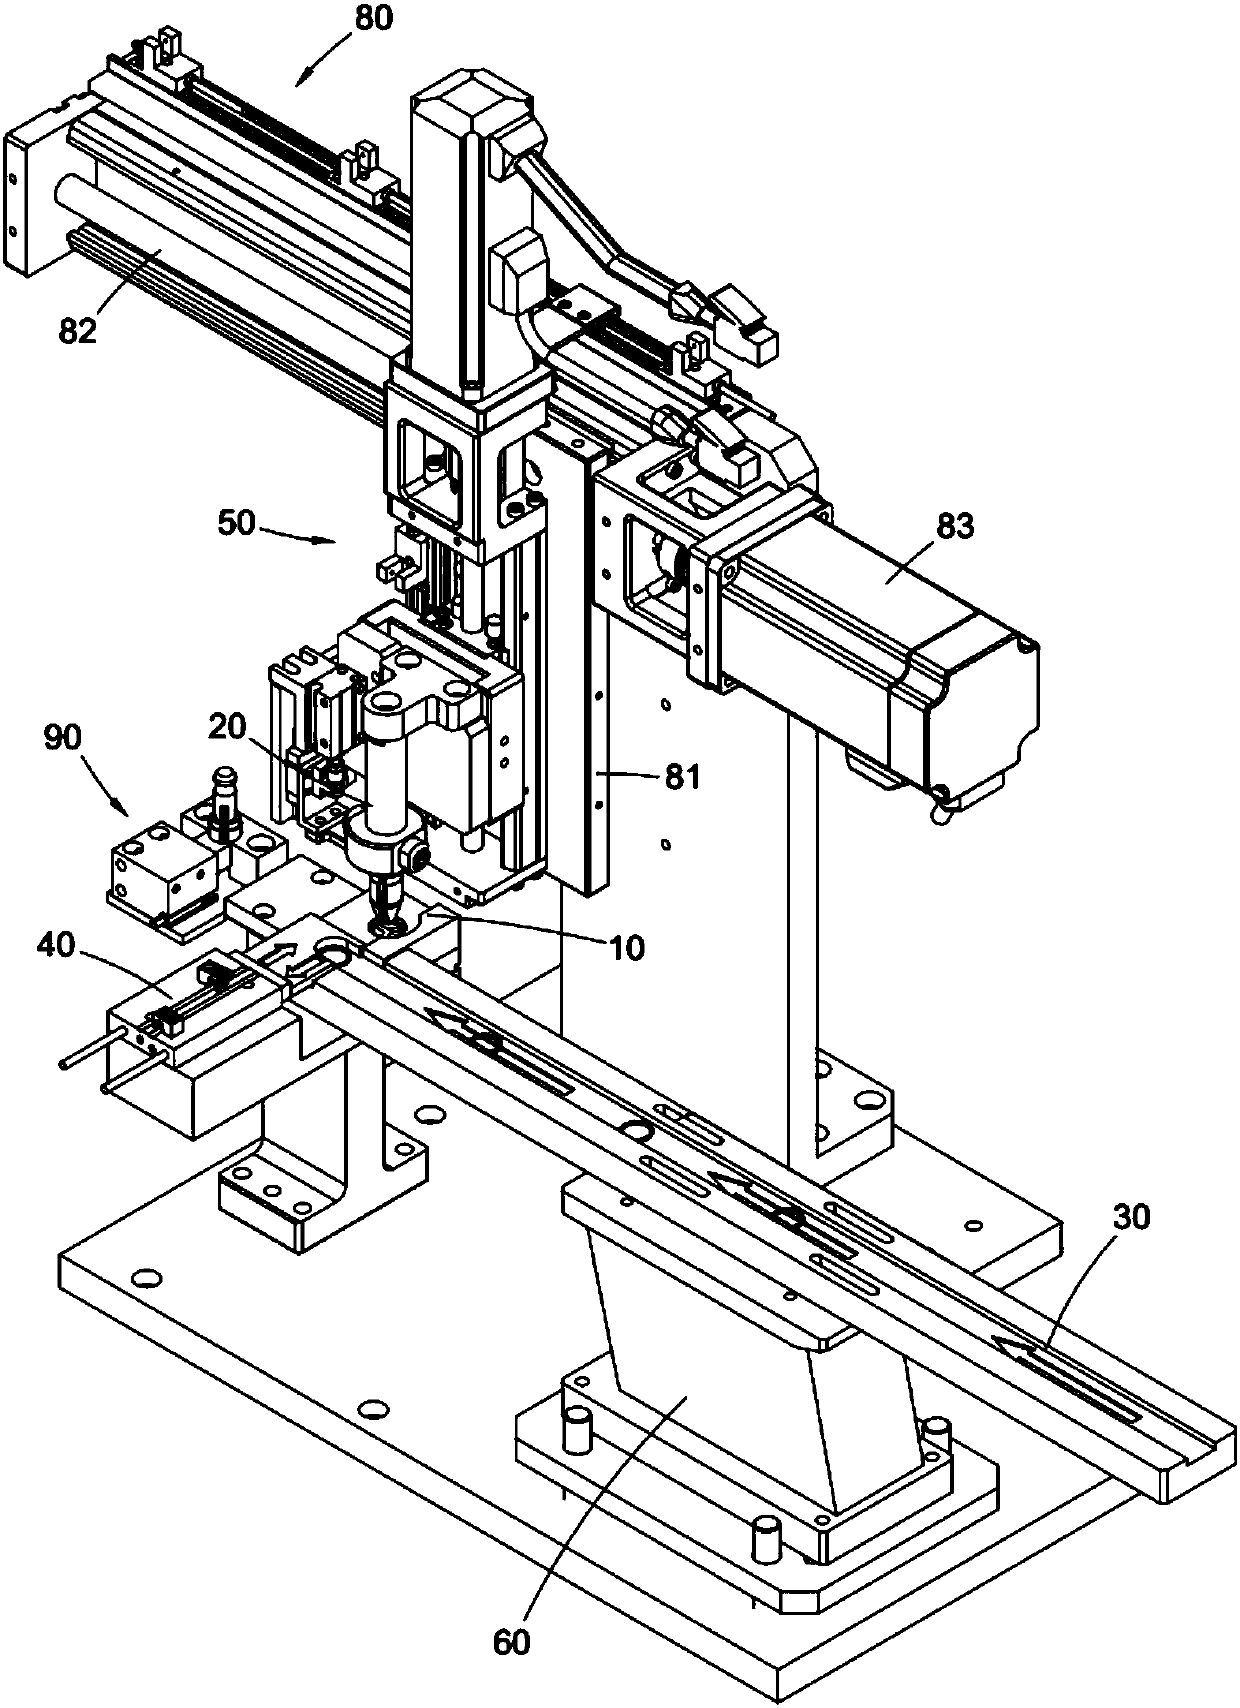 An integrated device for retrieving and assembling seal rings